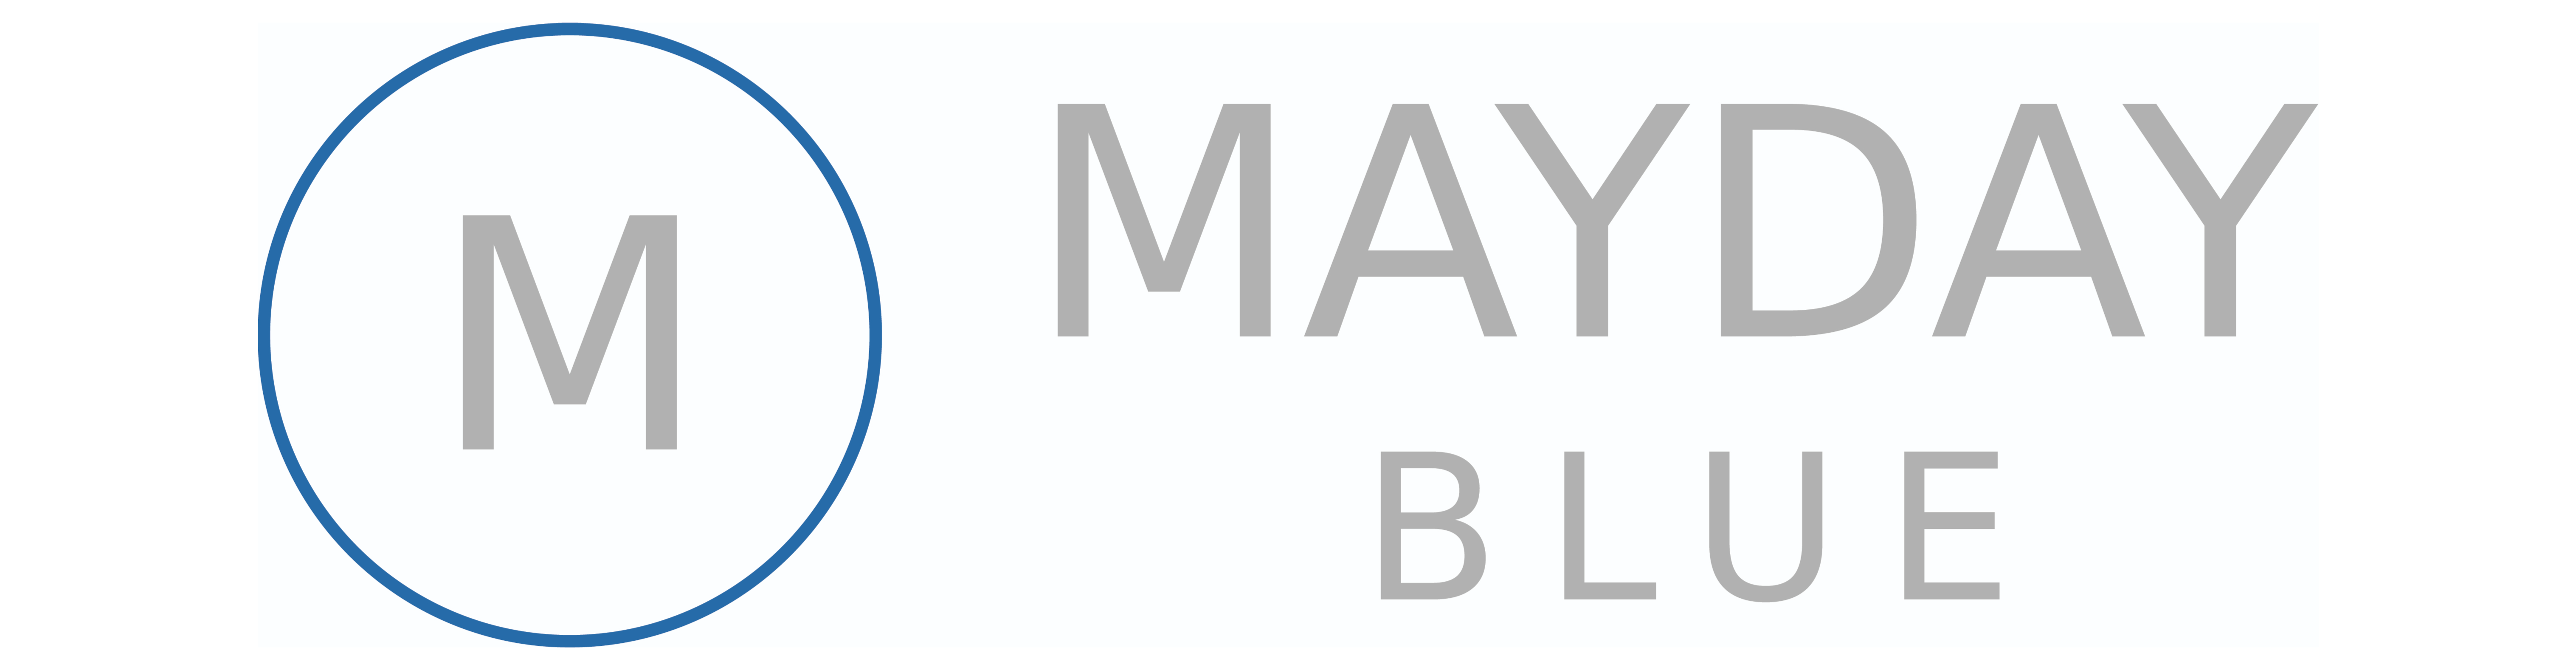 MAYDAY Blue banner